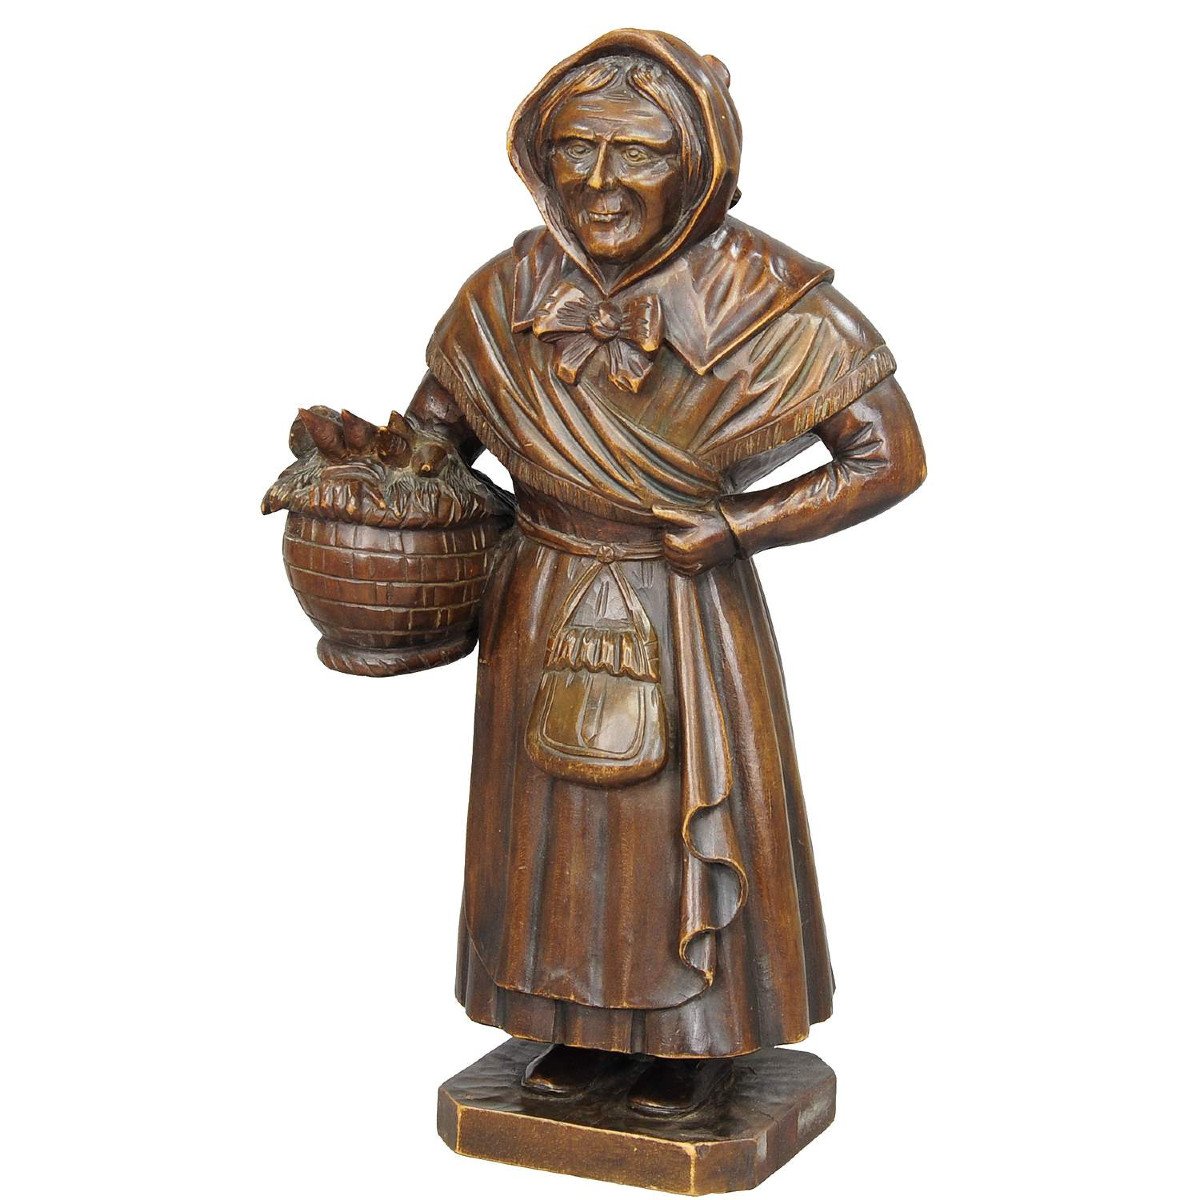 Antique Wooden Carved Sculpture Of A Folksy Countrywoman